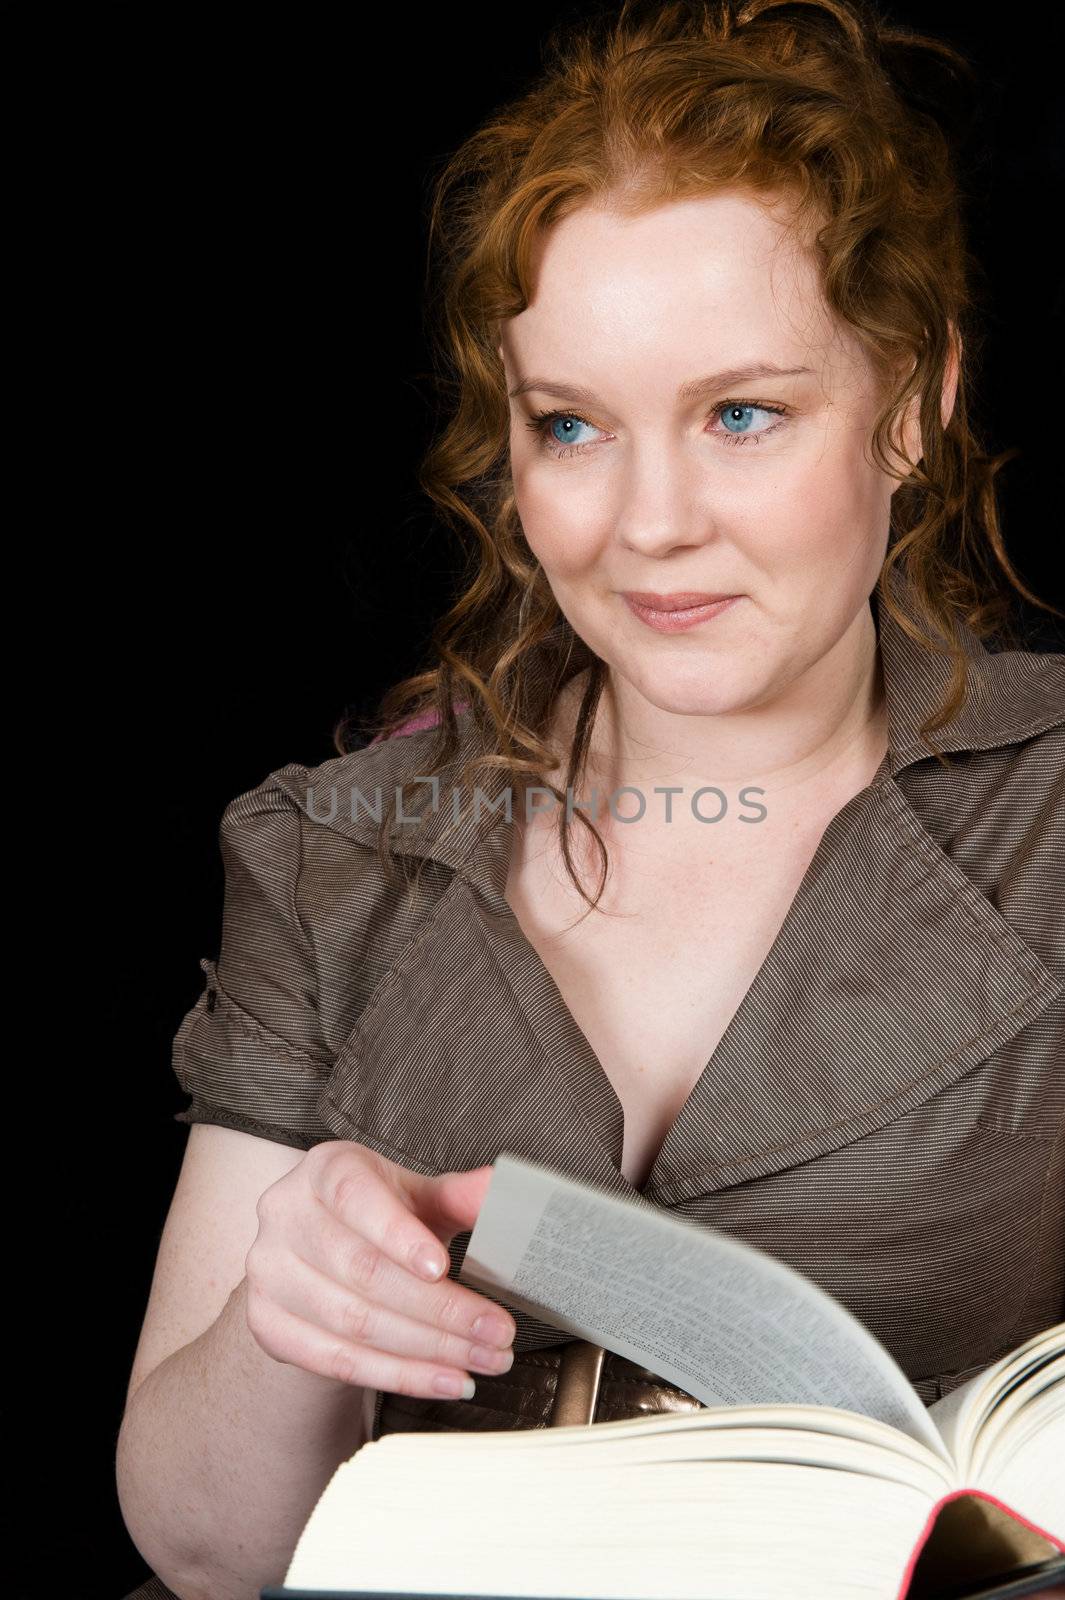 Reading girl distracted from her work by fljac